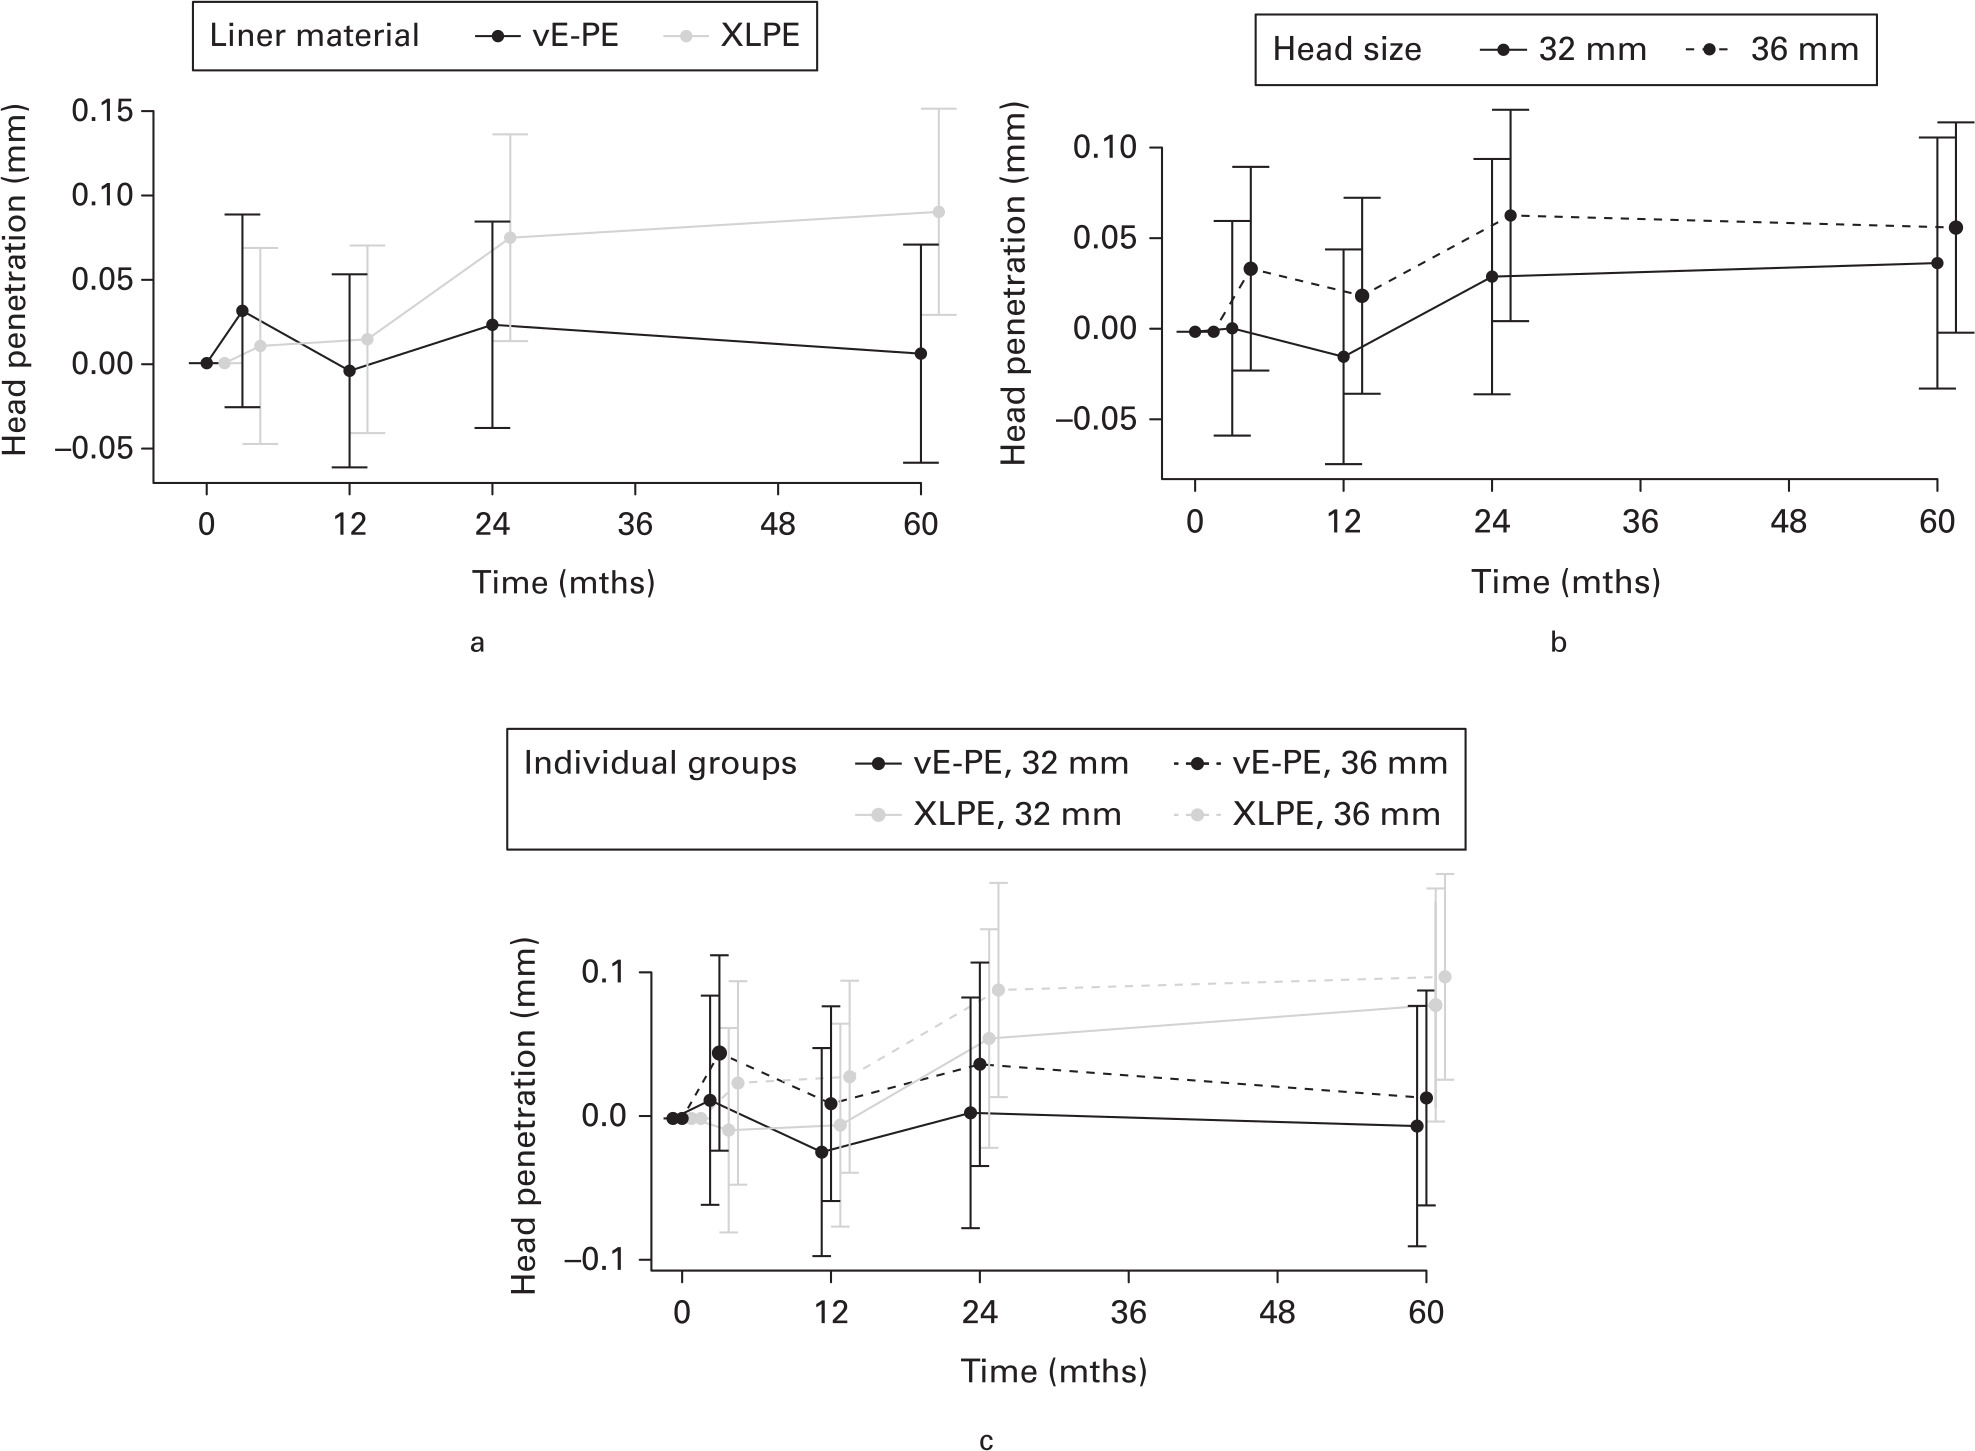 Fig. 2 
            Primary intention-to-treat outcomes shown with 95% confidence interval (CI) by grouped and individual intervention group: mean femoral head penetration with 95% CI into the polyethylene liner. a) Head penetration by liner material. b) Head penetration by head size. c) Head penetration according to individual intervention groups. vE-PE, vitamin E-doped cross-linked polyethylene liners; XLPE, cross-linked polyethylene liners; 32 mm, 32 mm CoCr femoral head; 36, 36 mm CoCr femoral head.
          